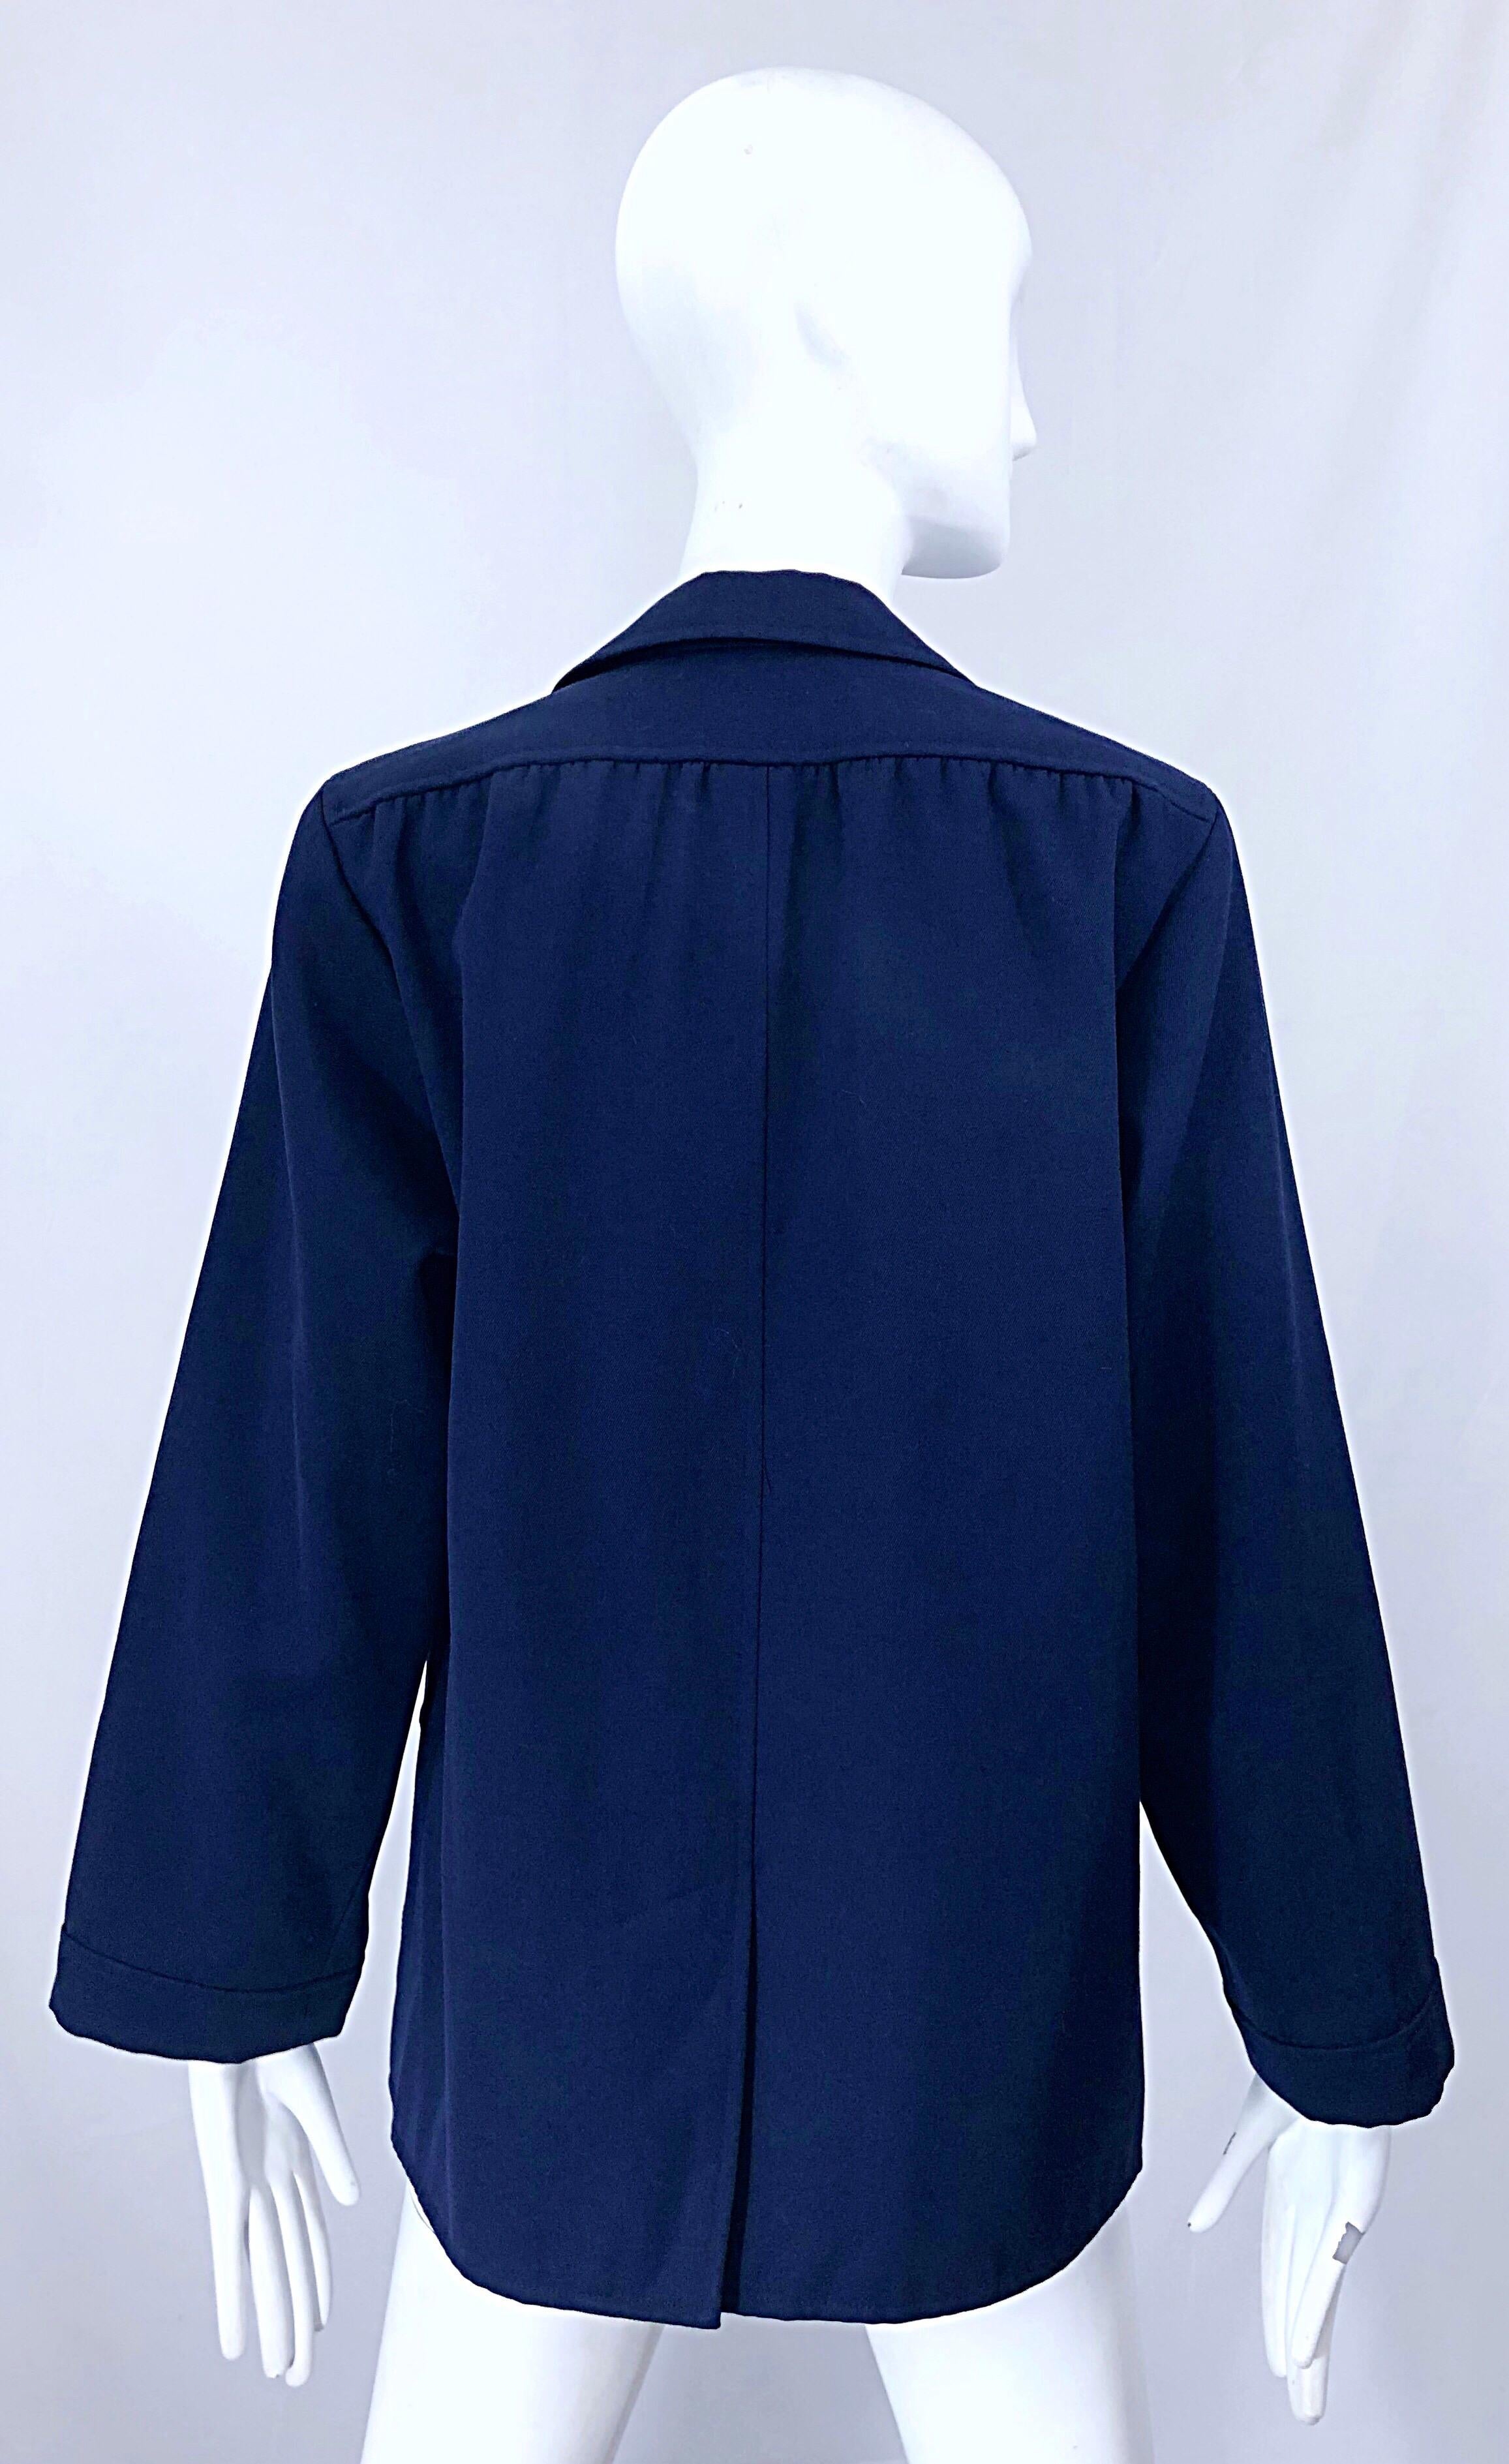 Chic 1960s Yves Saint Laurent Navy Blue Lightweight Wool Vintage Swing Jacket In Excellent Condition For Sale In San Diego, CA